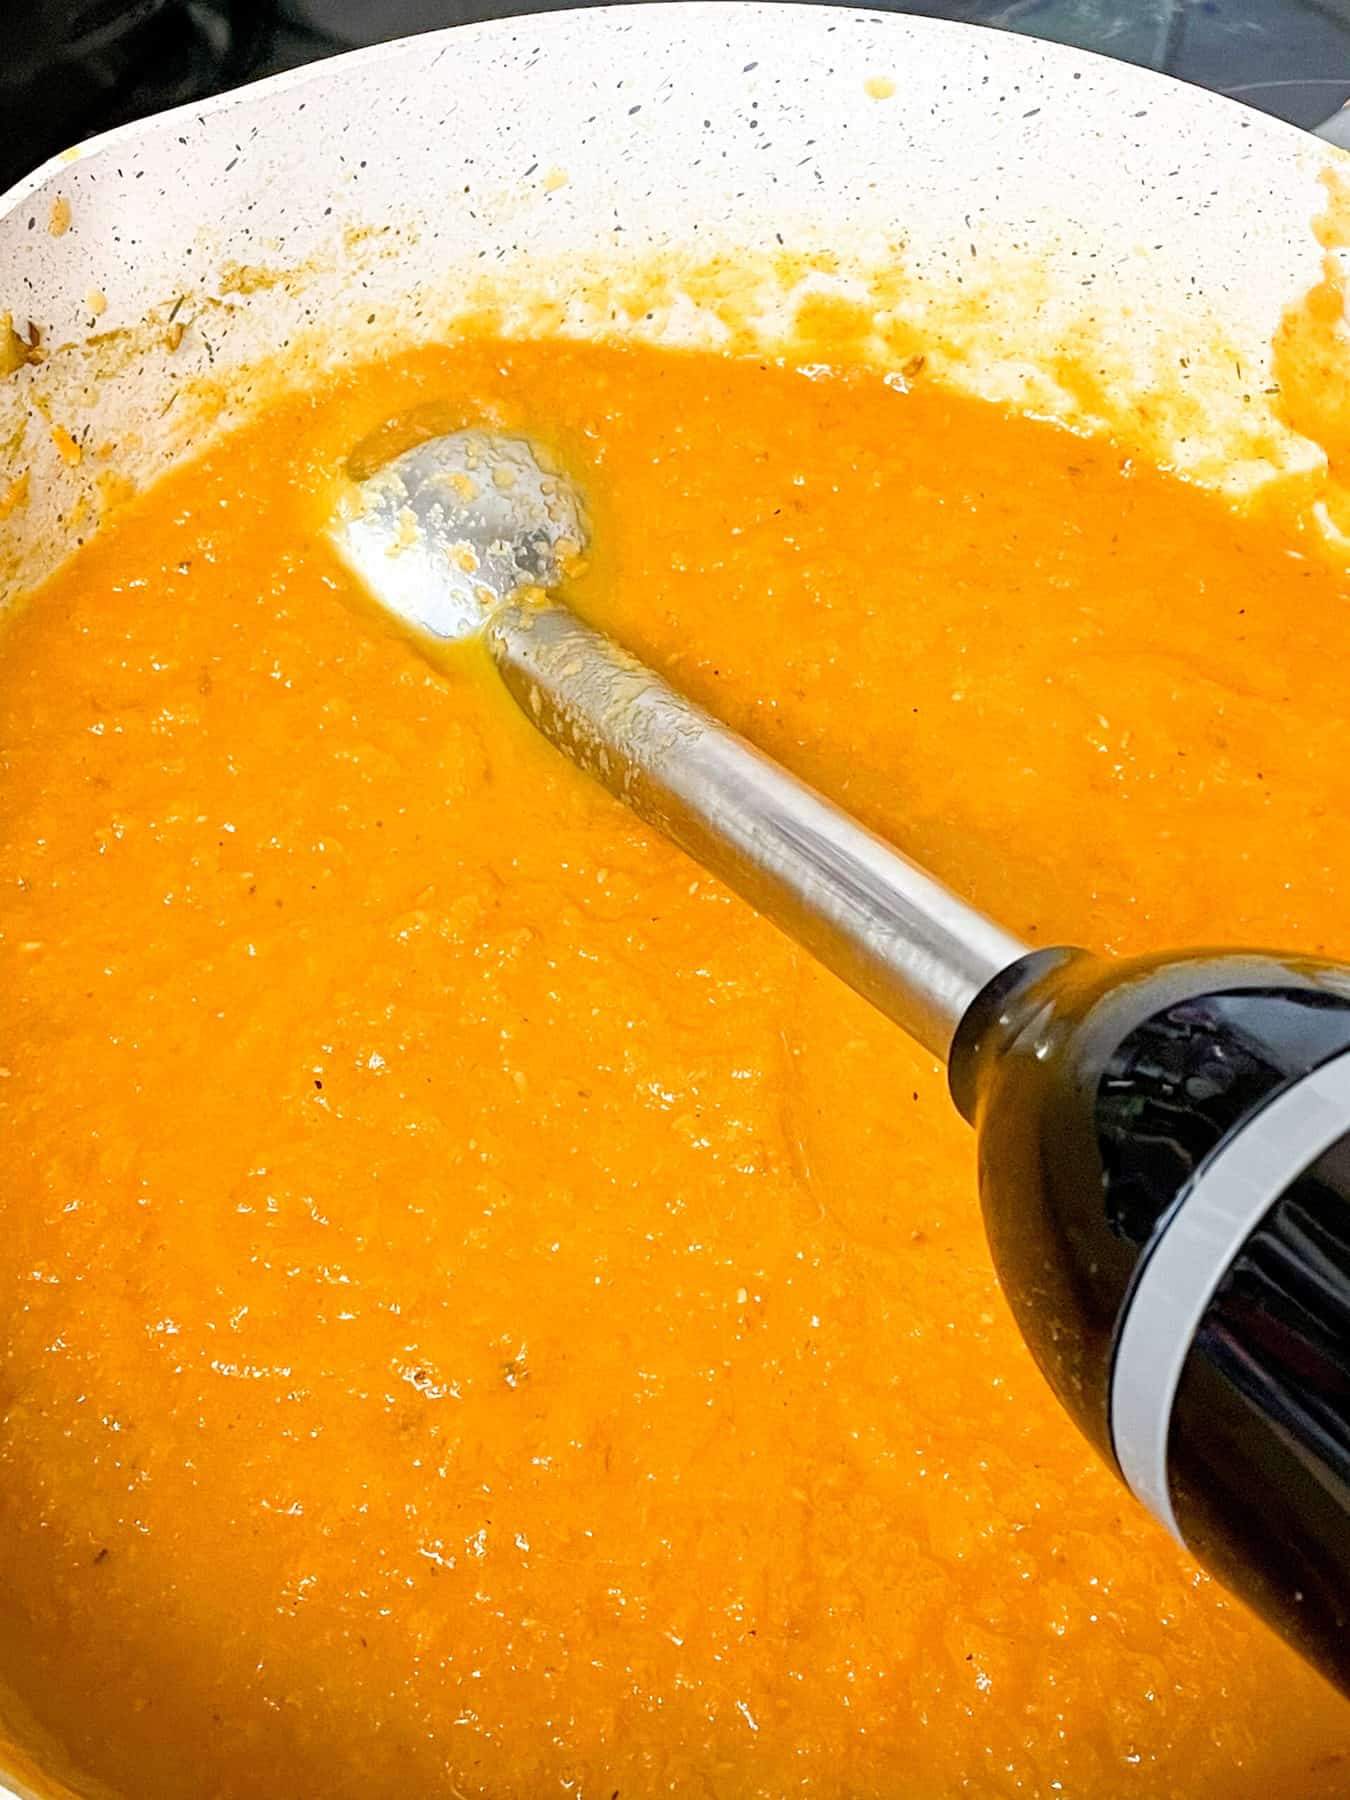 An immersion stick blender in the soup pot blending the soup to a puree.